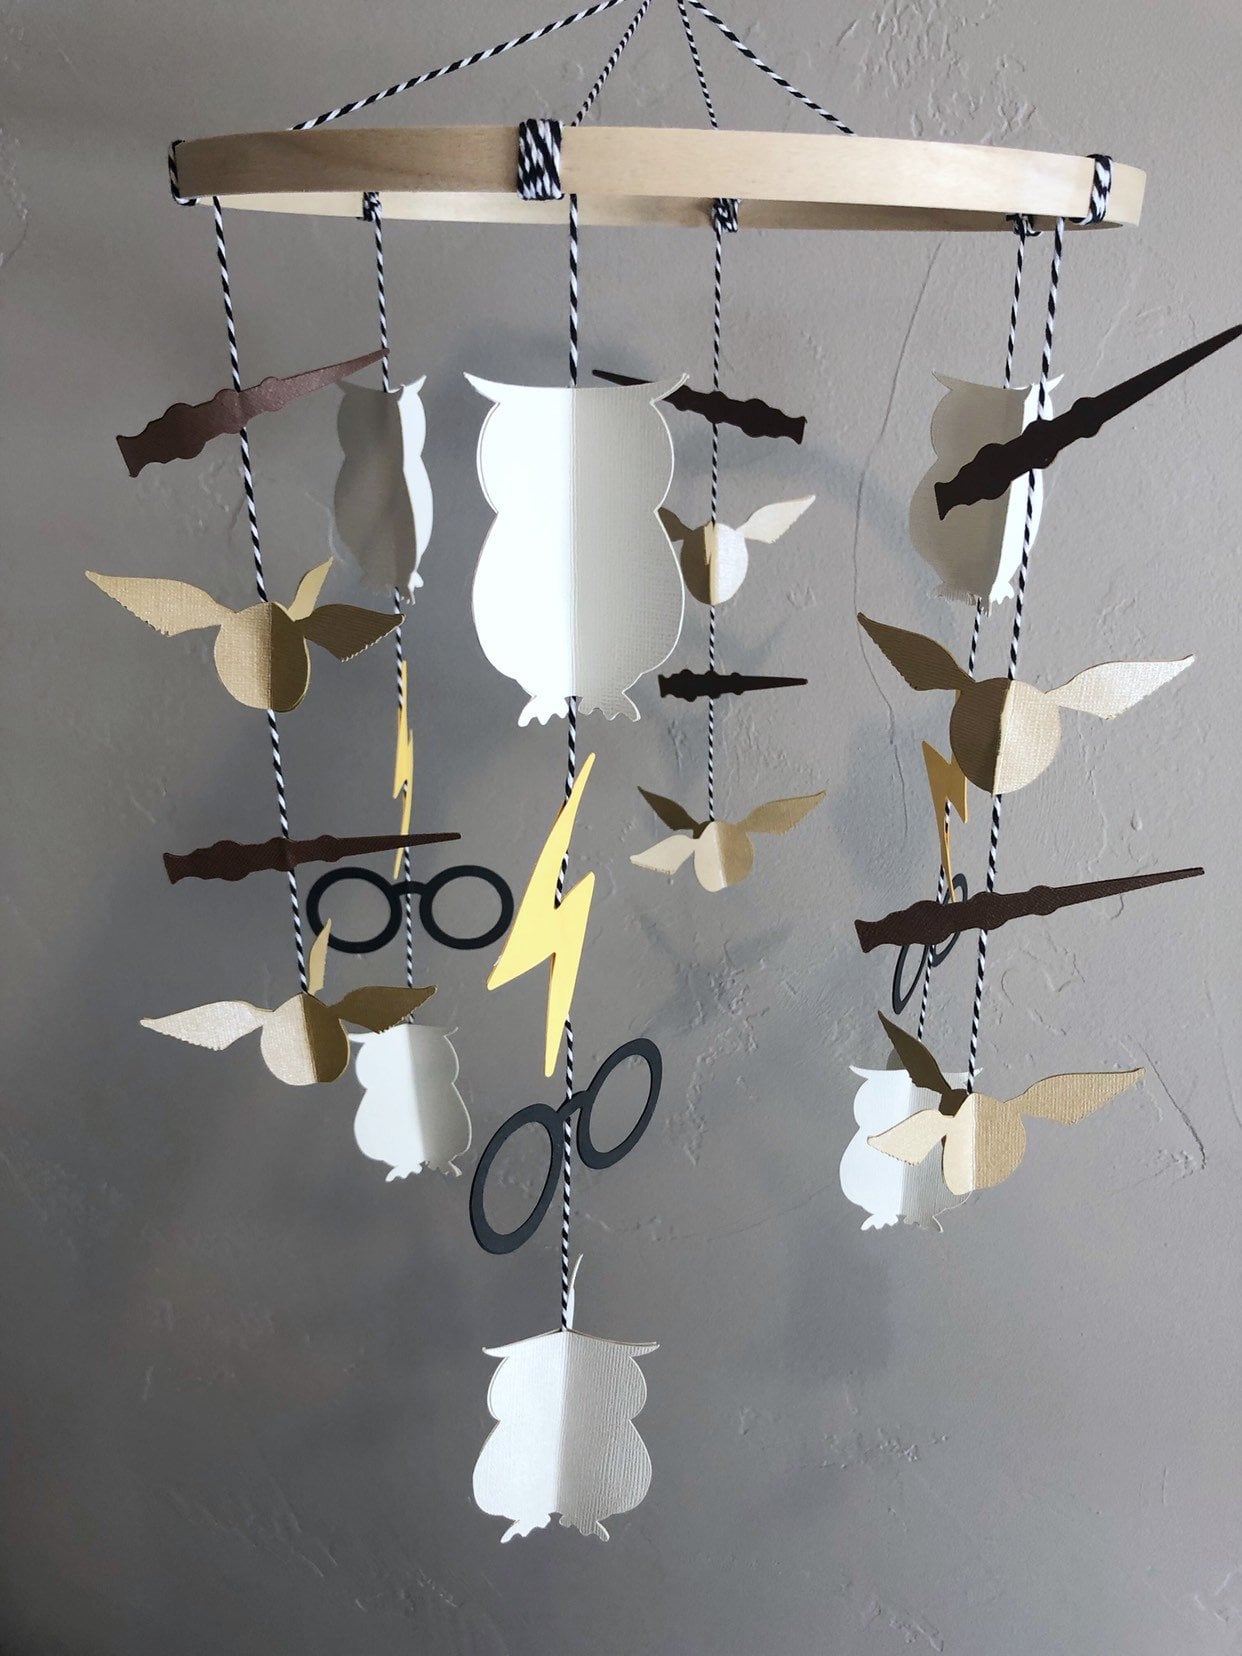 Harry Potter-Themed Decorations for a Baby Nursery 2021